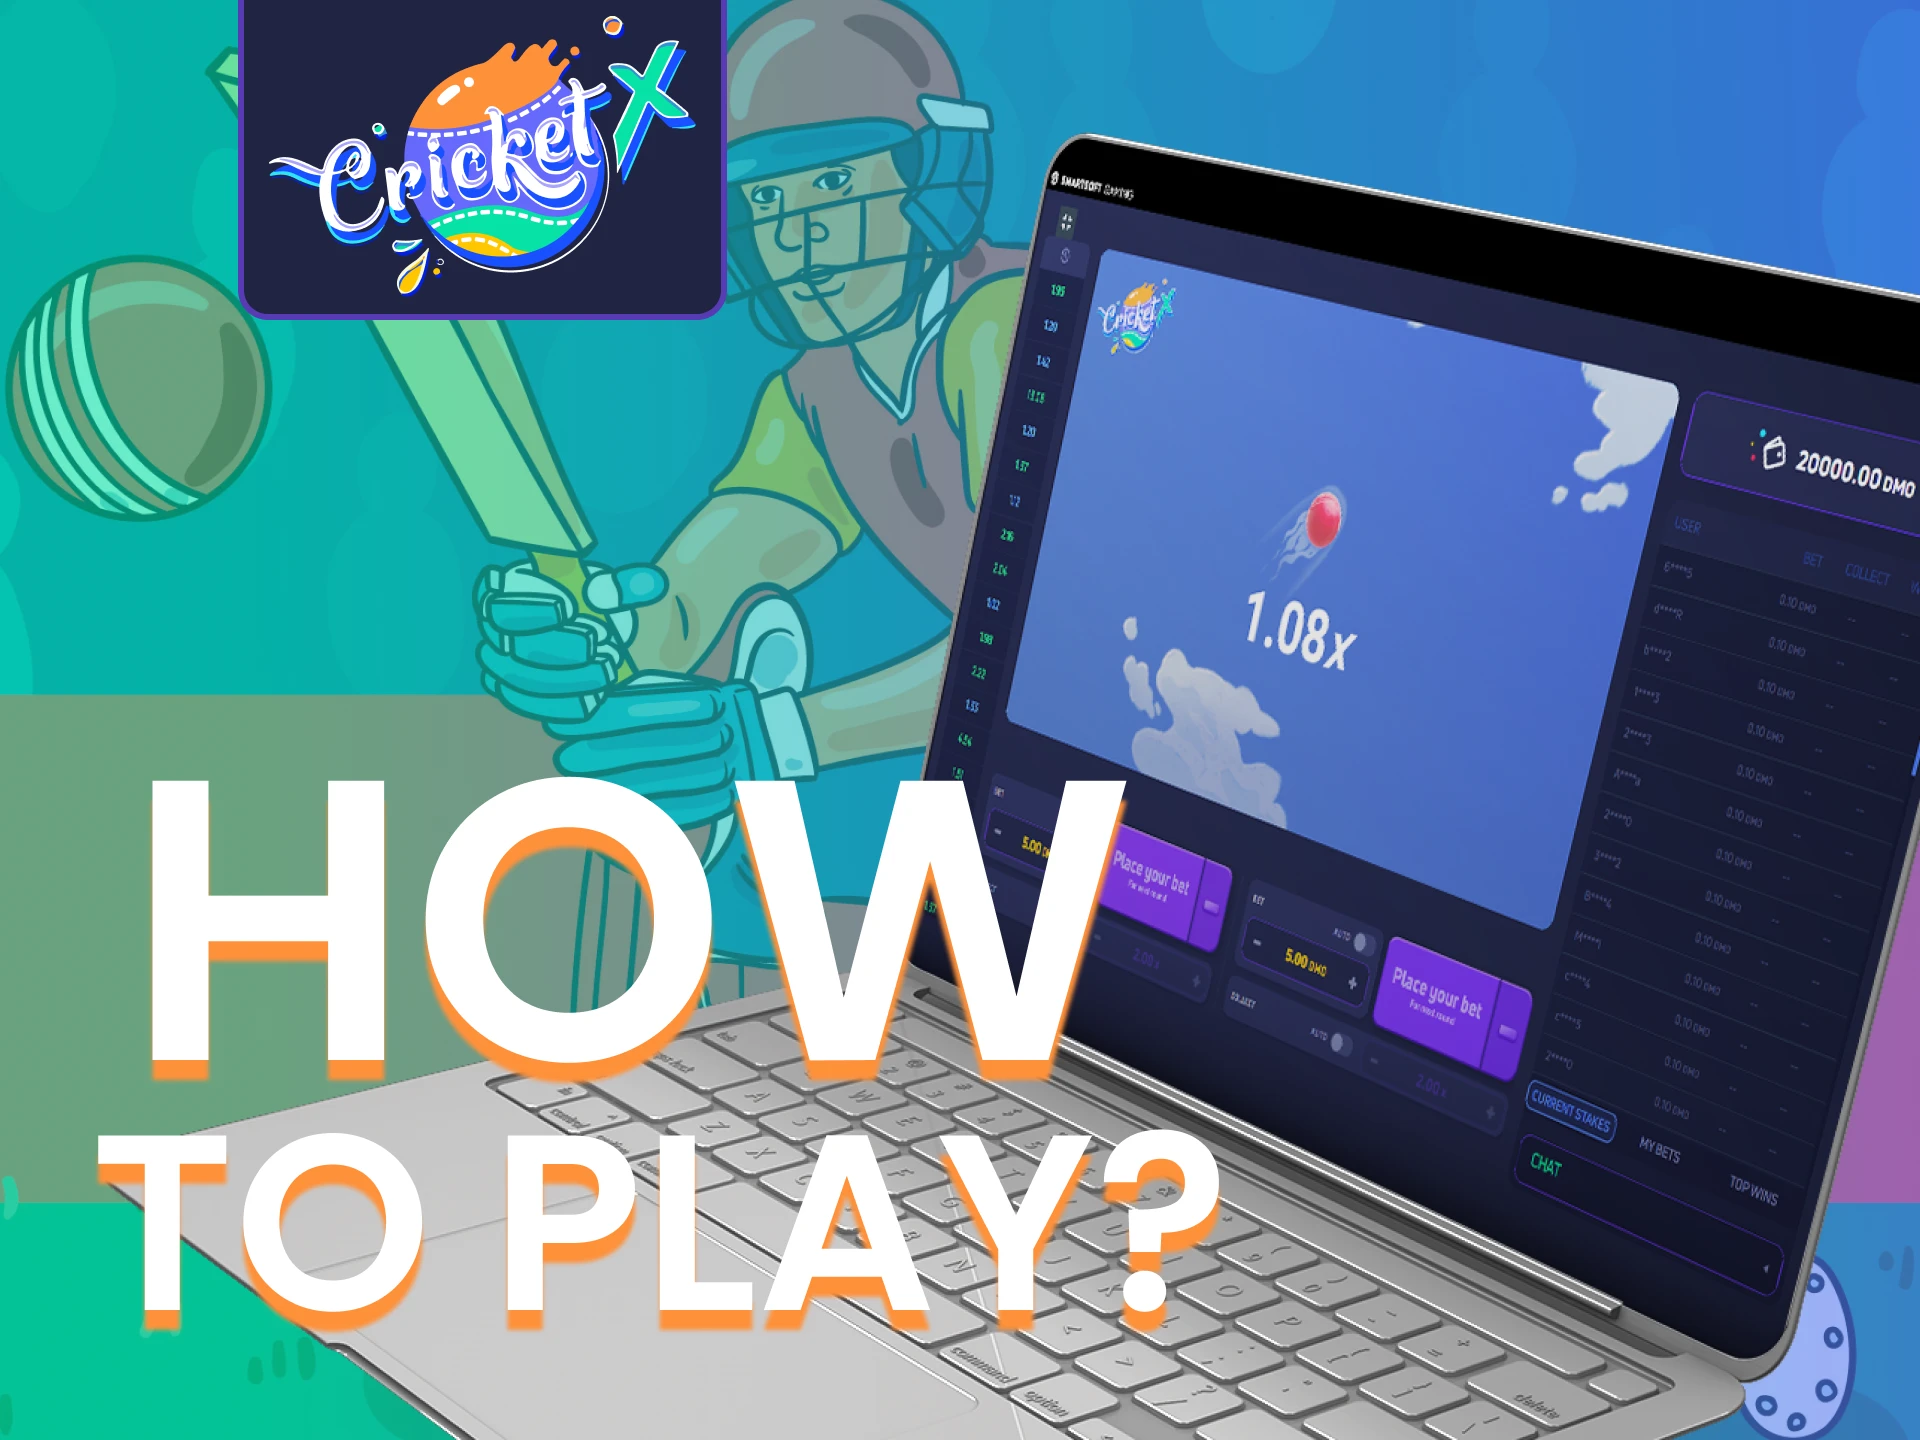 We will tell you how to start playing Cricket X.